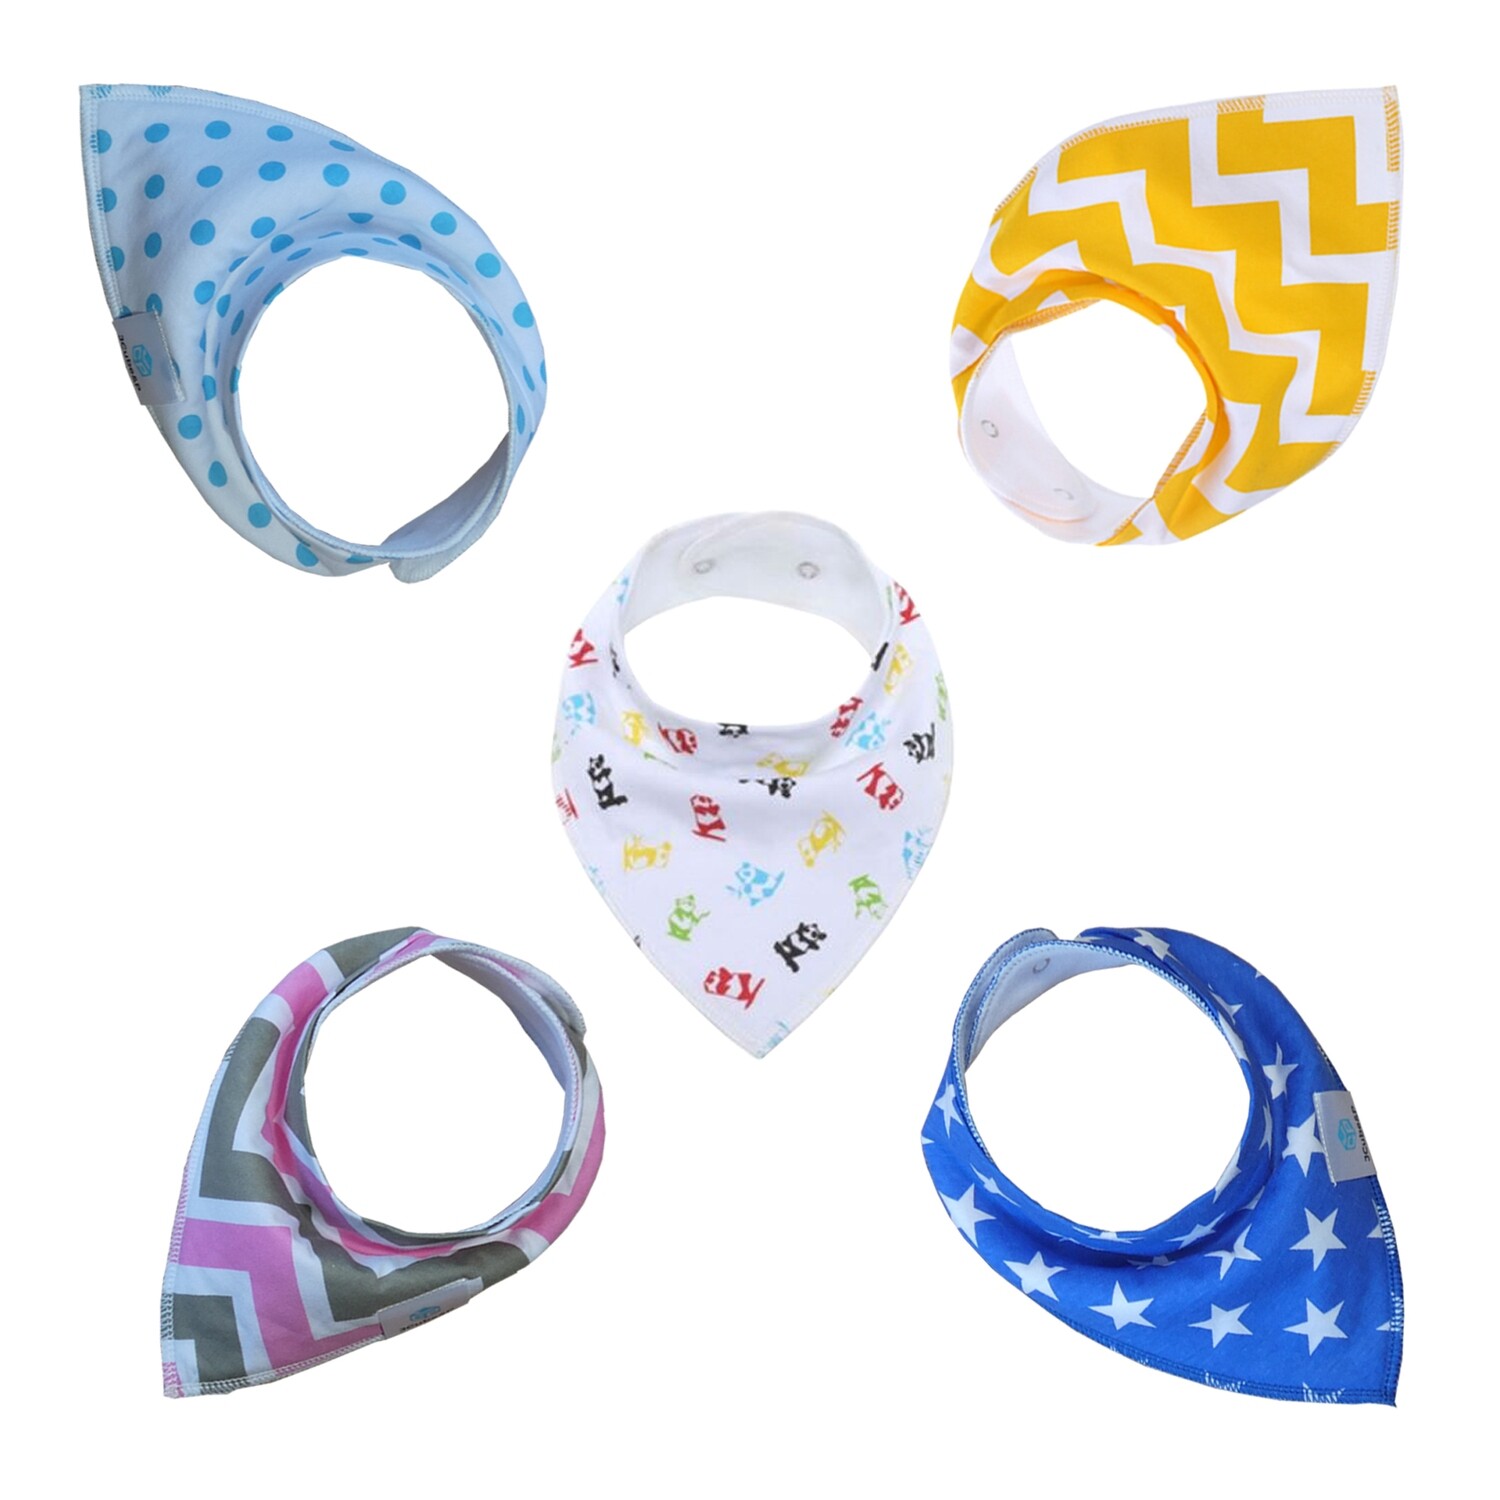 5-Pack Baby Bandana Bibs for Drooling and Teething - 100% Organic Cotton and Fleece Layers - Soft, Absorbent and Hypoallergenic.